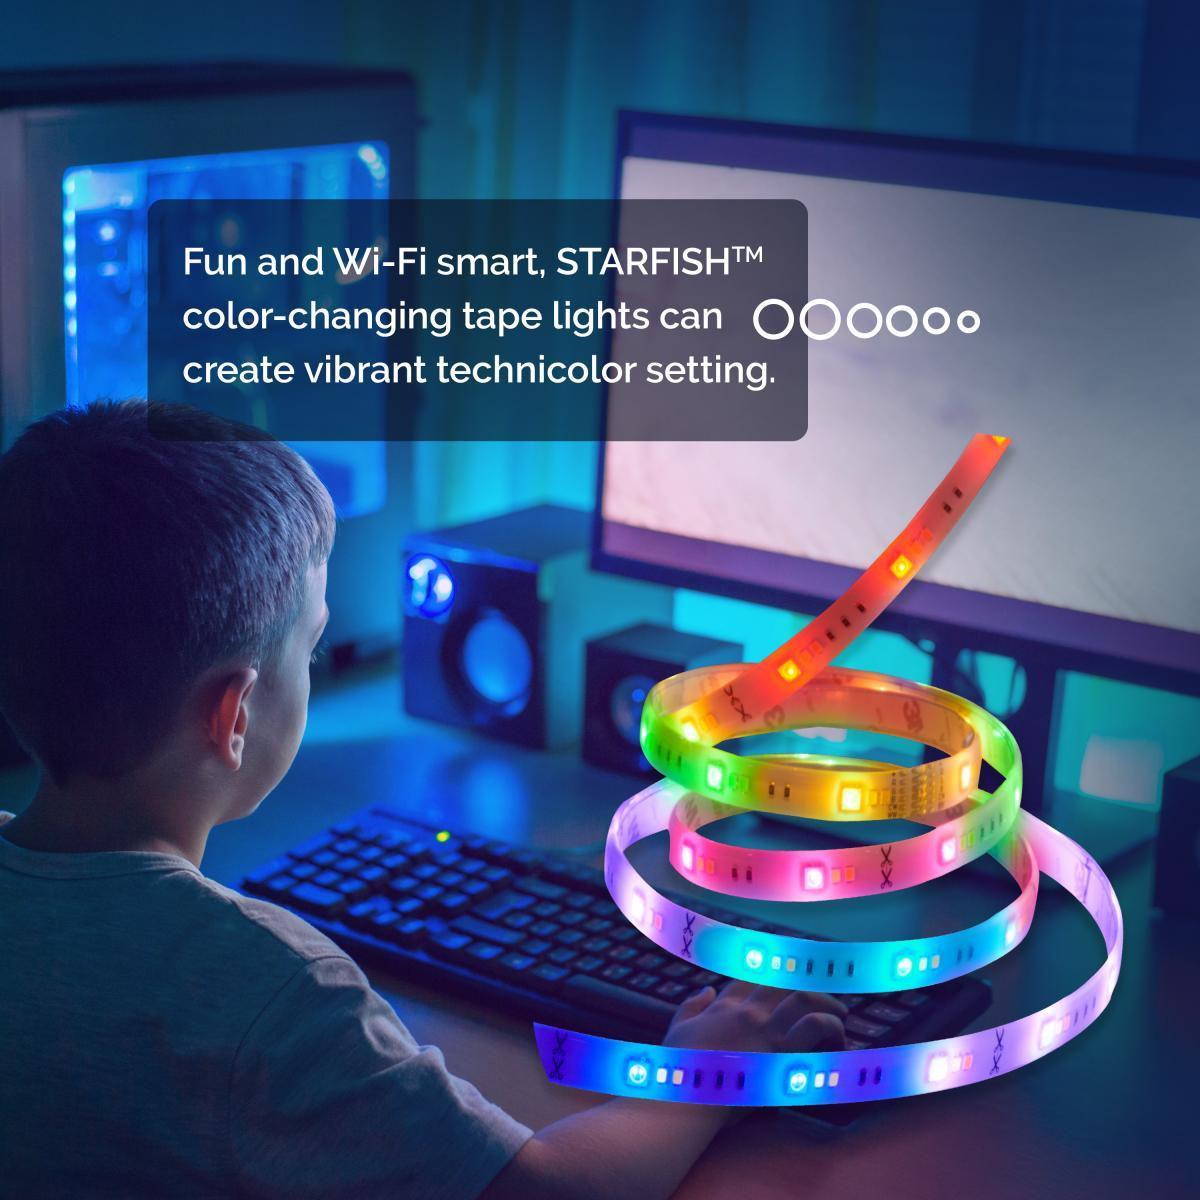 Starfish Wifi Smart LED Strip Light Kit, 6 feet with Power Supply, Color Changing RGB and Tunable White, 12V